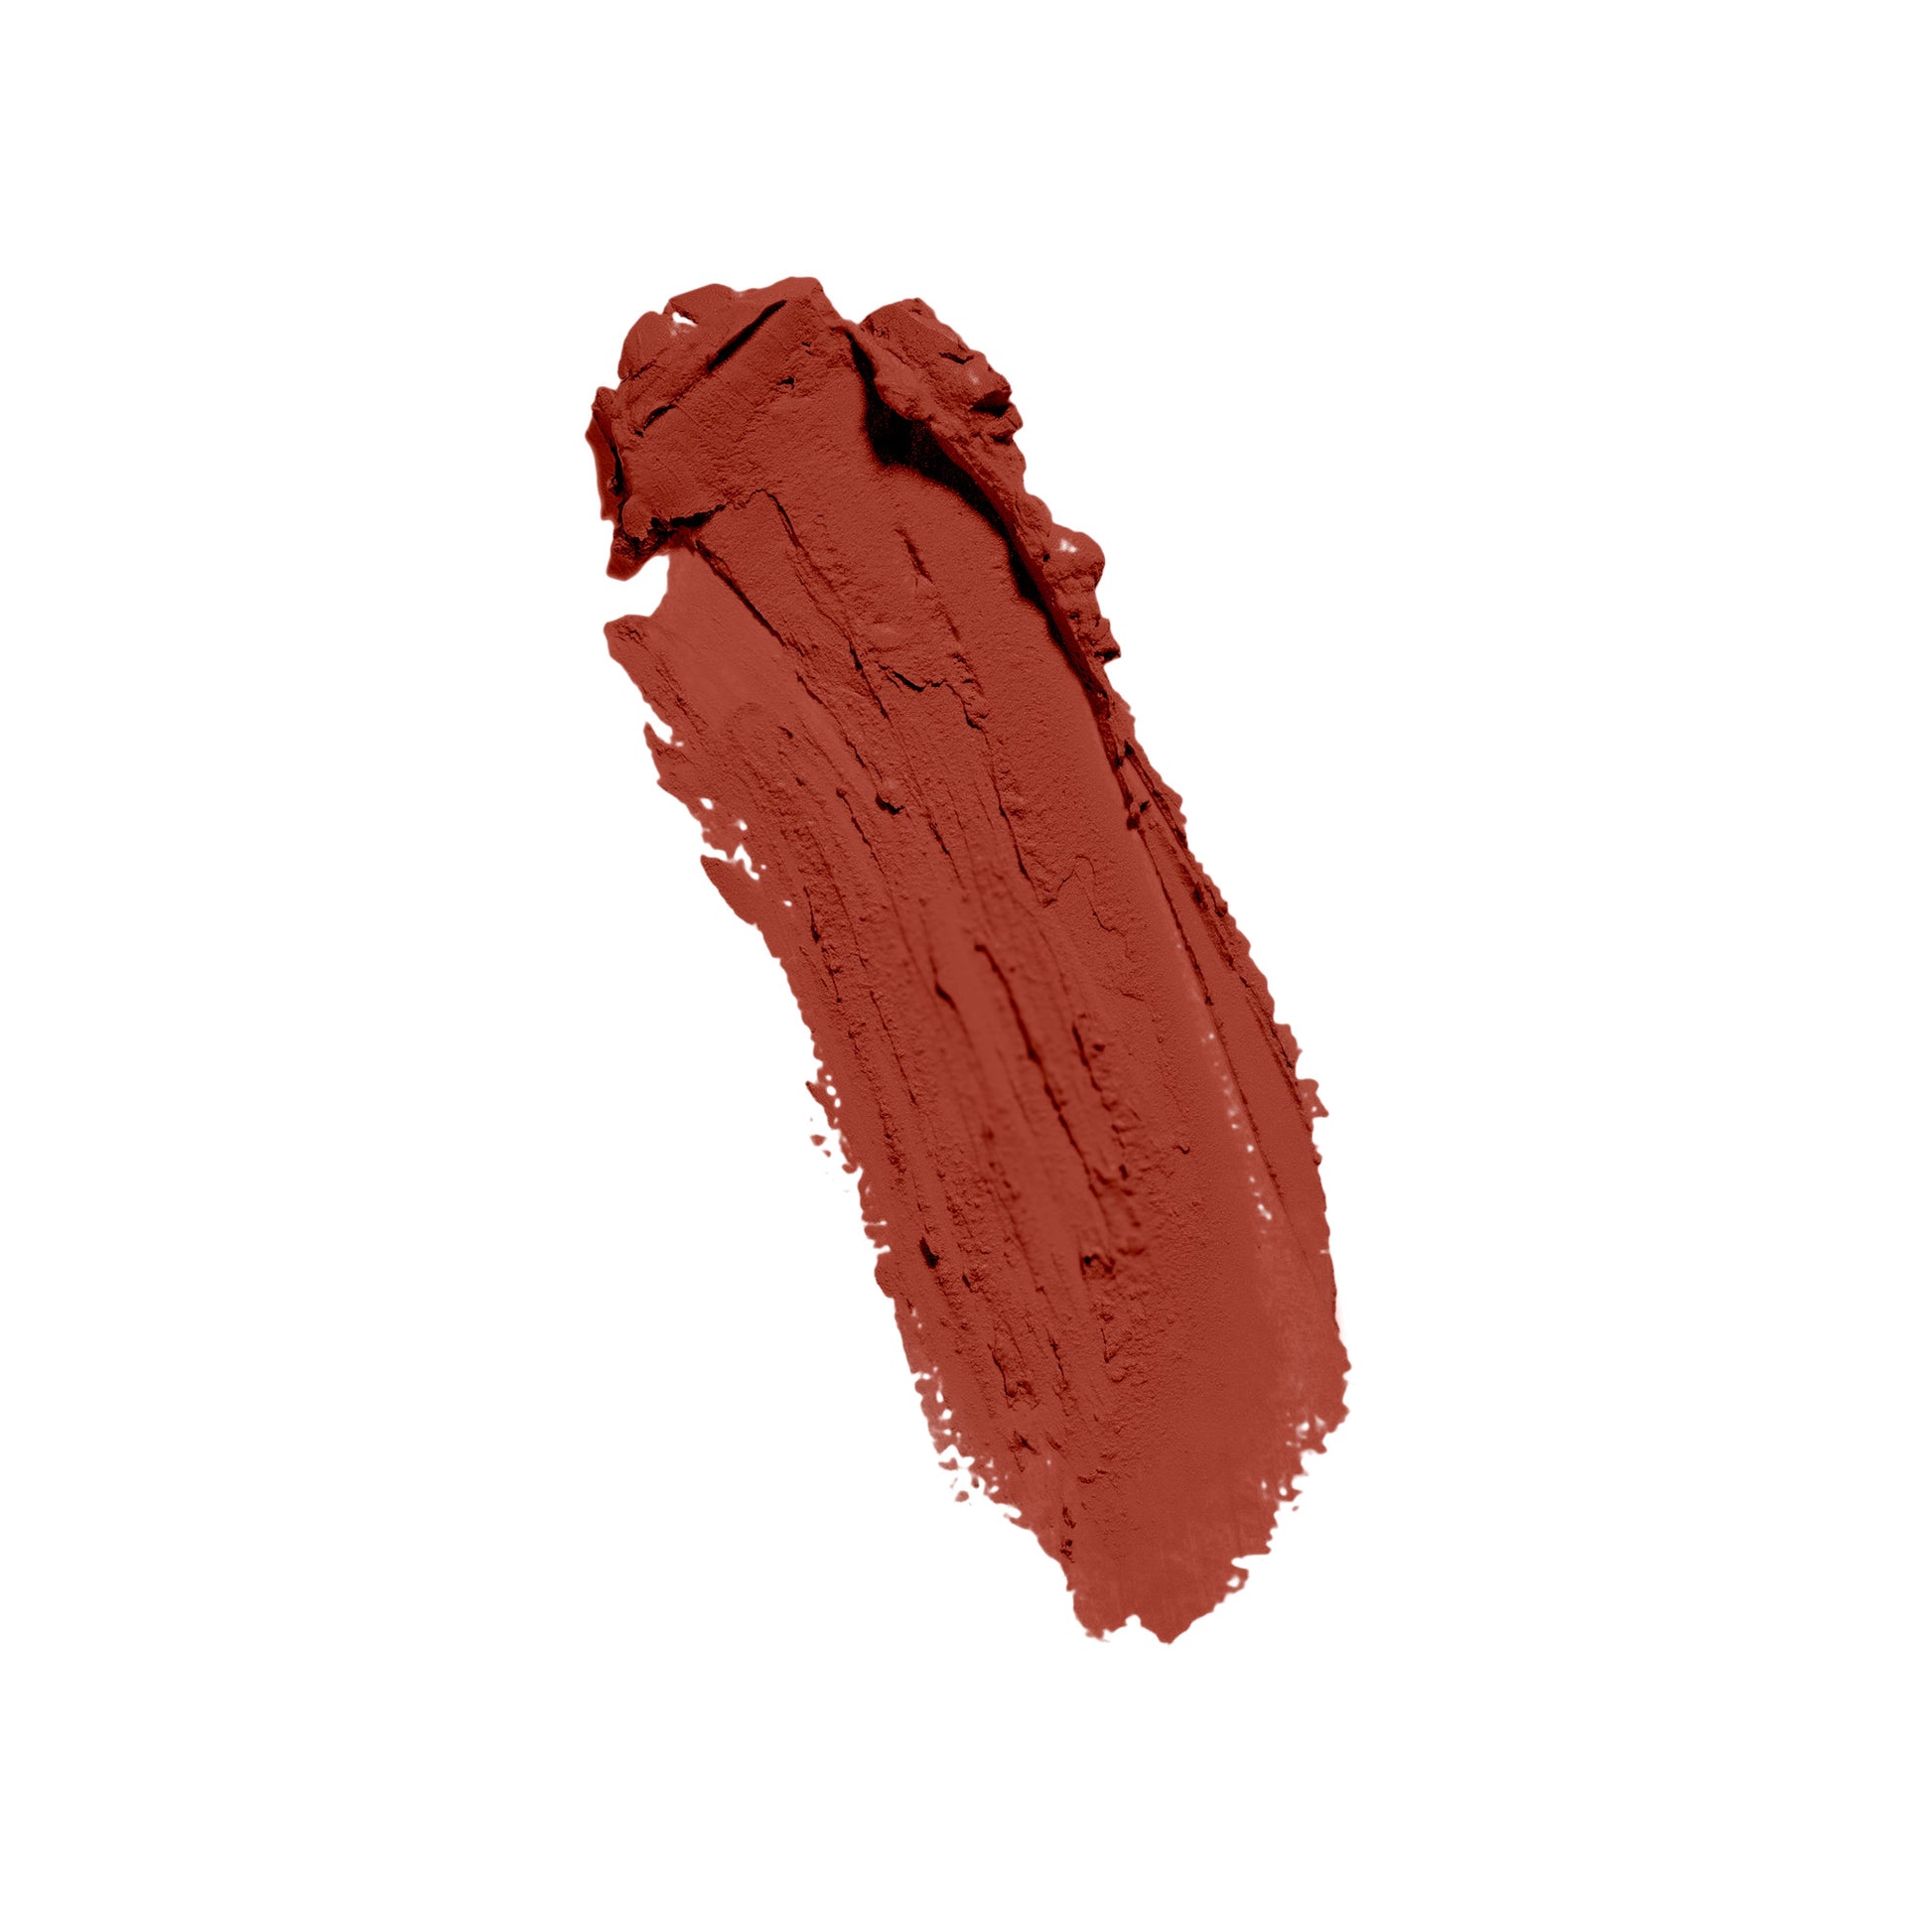 NXTE NXTEssence Bunny Brown Lip Stick Swatch Color